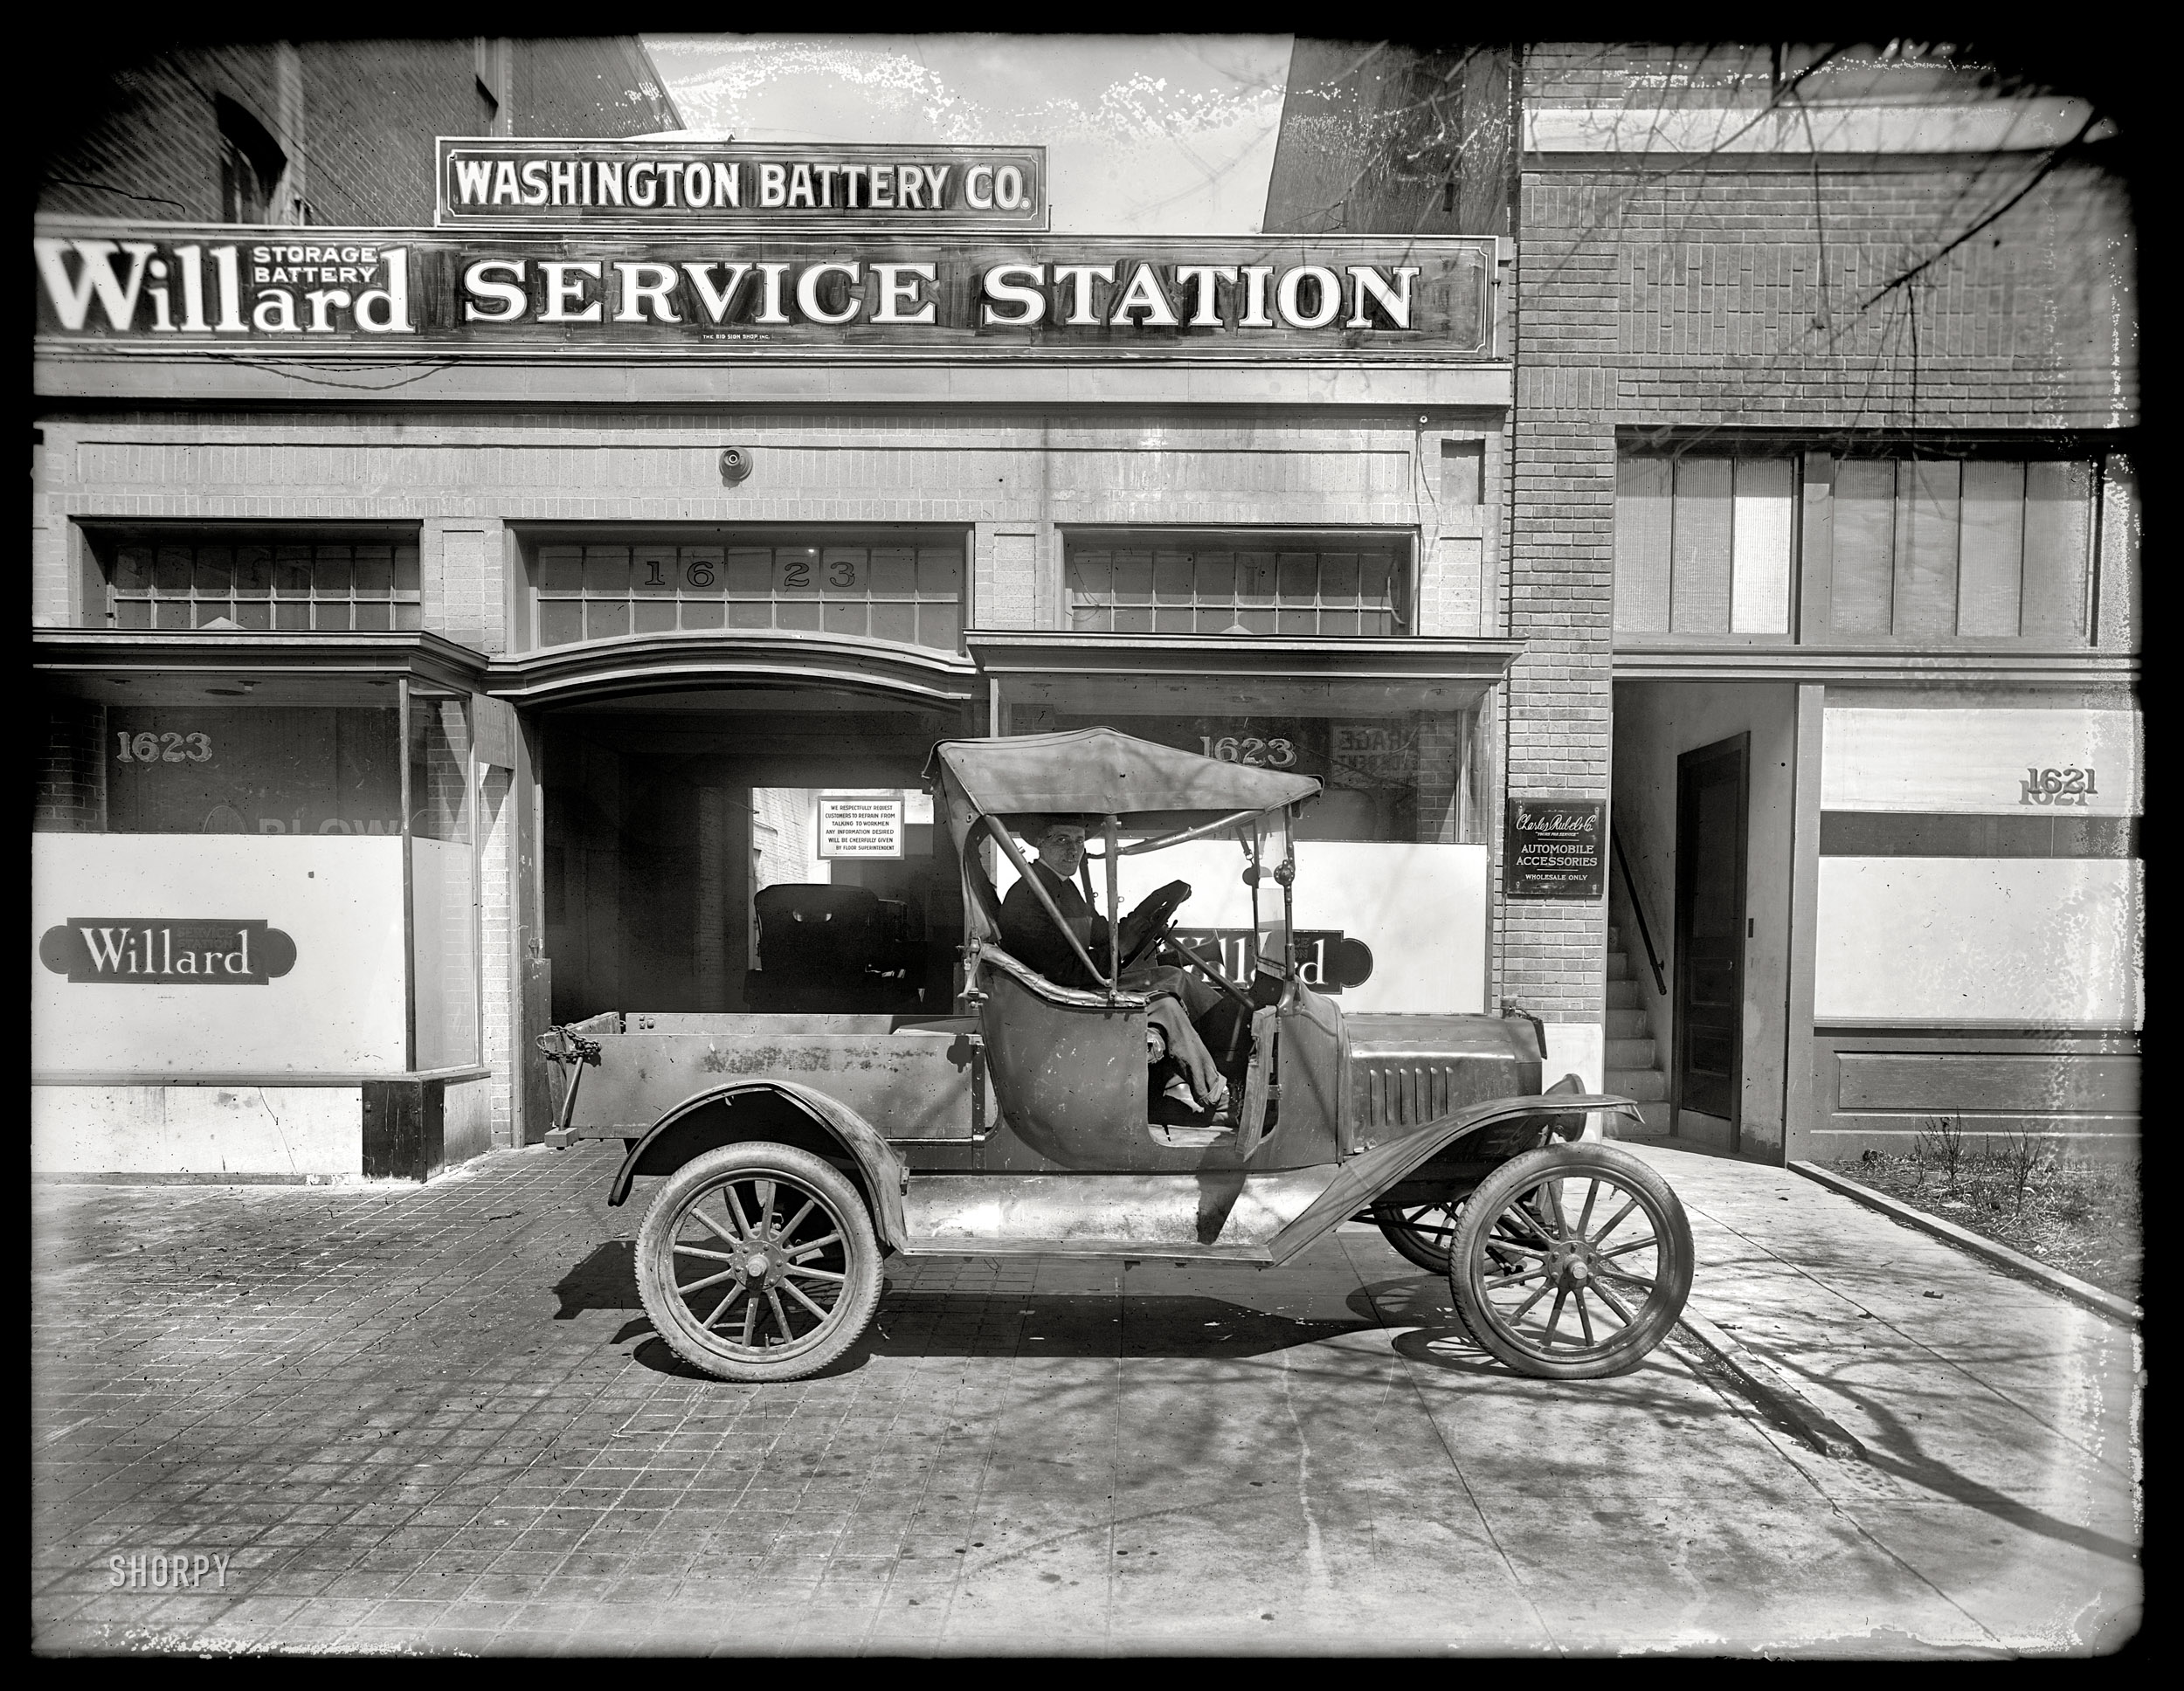 Washington, D.C., circa 1919. "Washington Battery Co., L Street." We saw the garage earlier in this post. National Photo Co. glass negative. View full size.